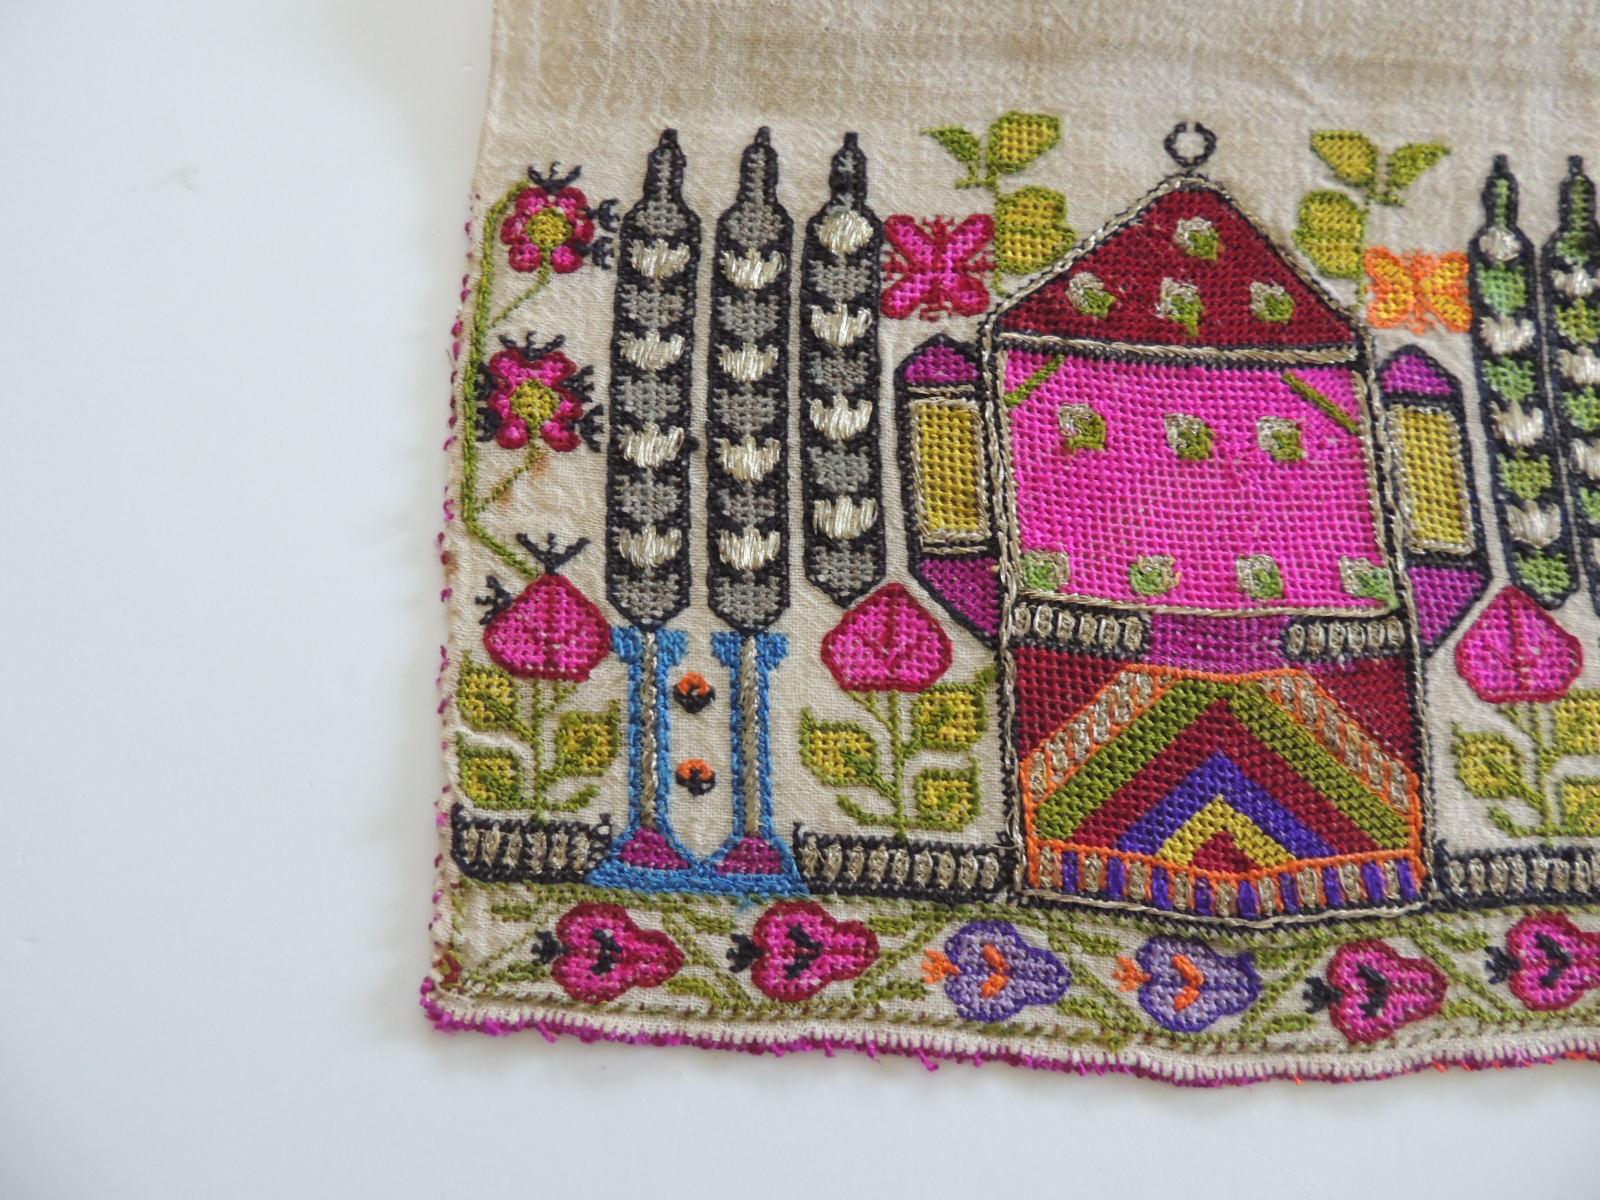 Antique Turkish embroidered colorful textile.
Heavy metallic threads and silk embroidered on linen.
In shades of red, blue, green, purple, orange and fuschia.
The embroidered part is 15.5